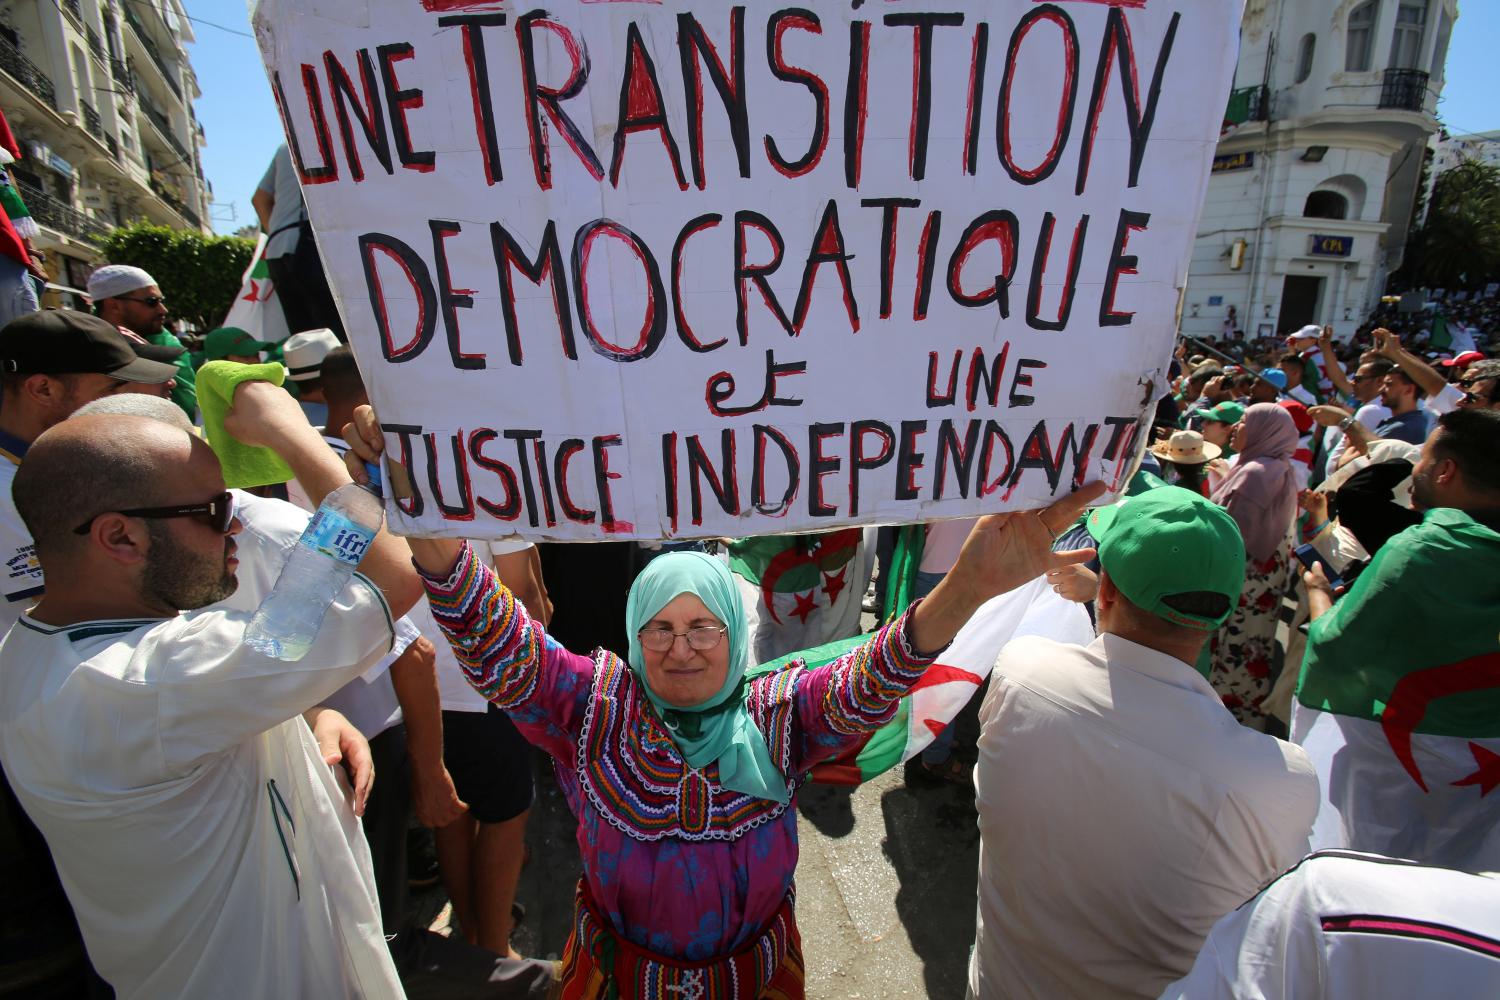 A demonstrator holds up a sign during a protest demanding the removal of the ruling elite in Algiers, Algeria June 28, 2019. The sign reads: " A democratic transition and an independent justice".  REUTERS/Ramzi Boudina